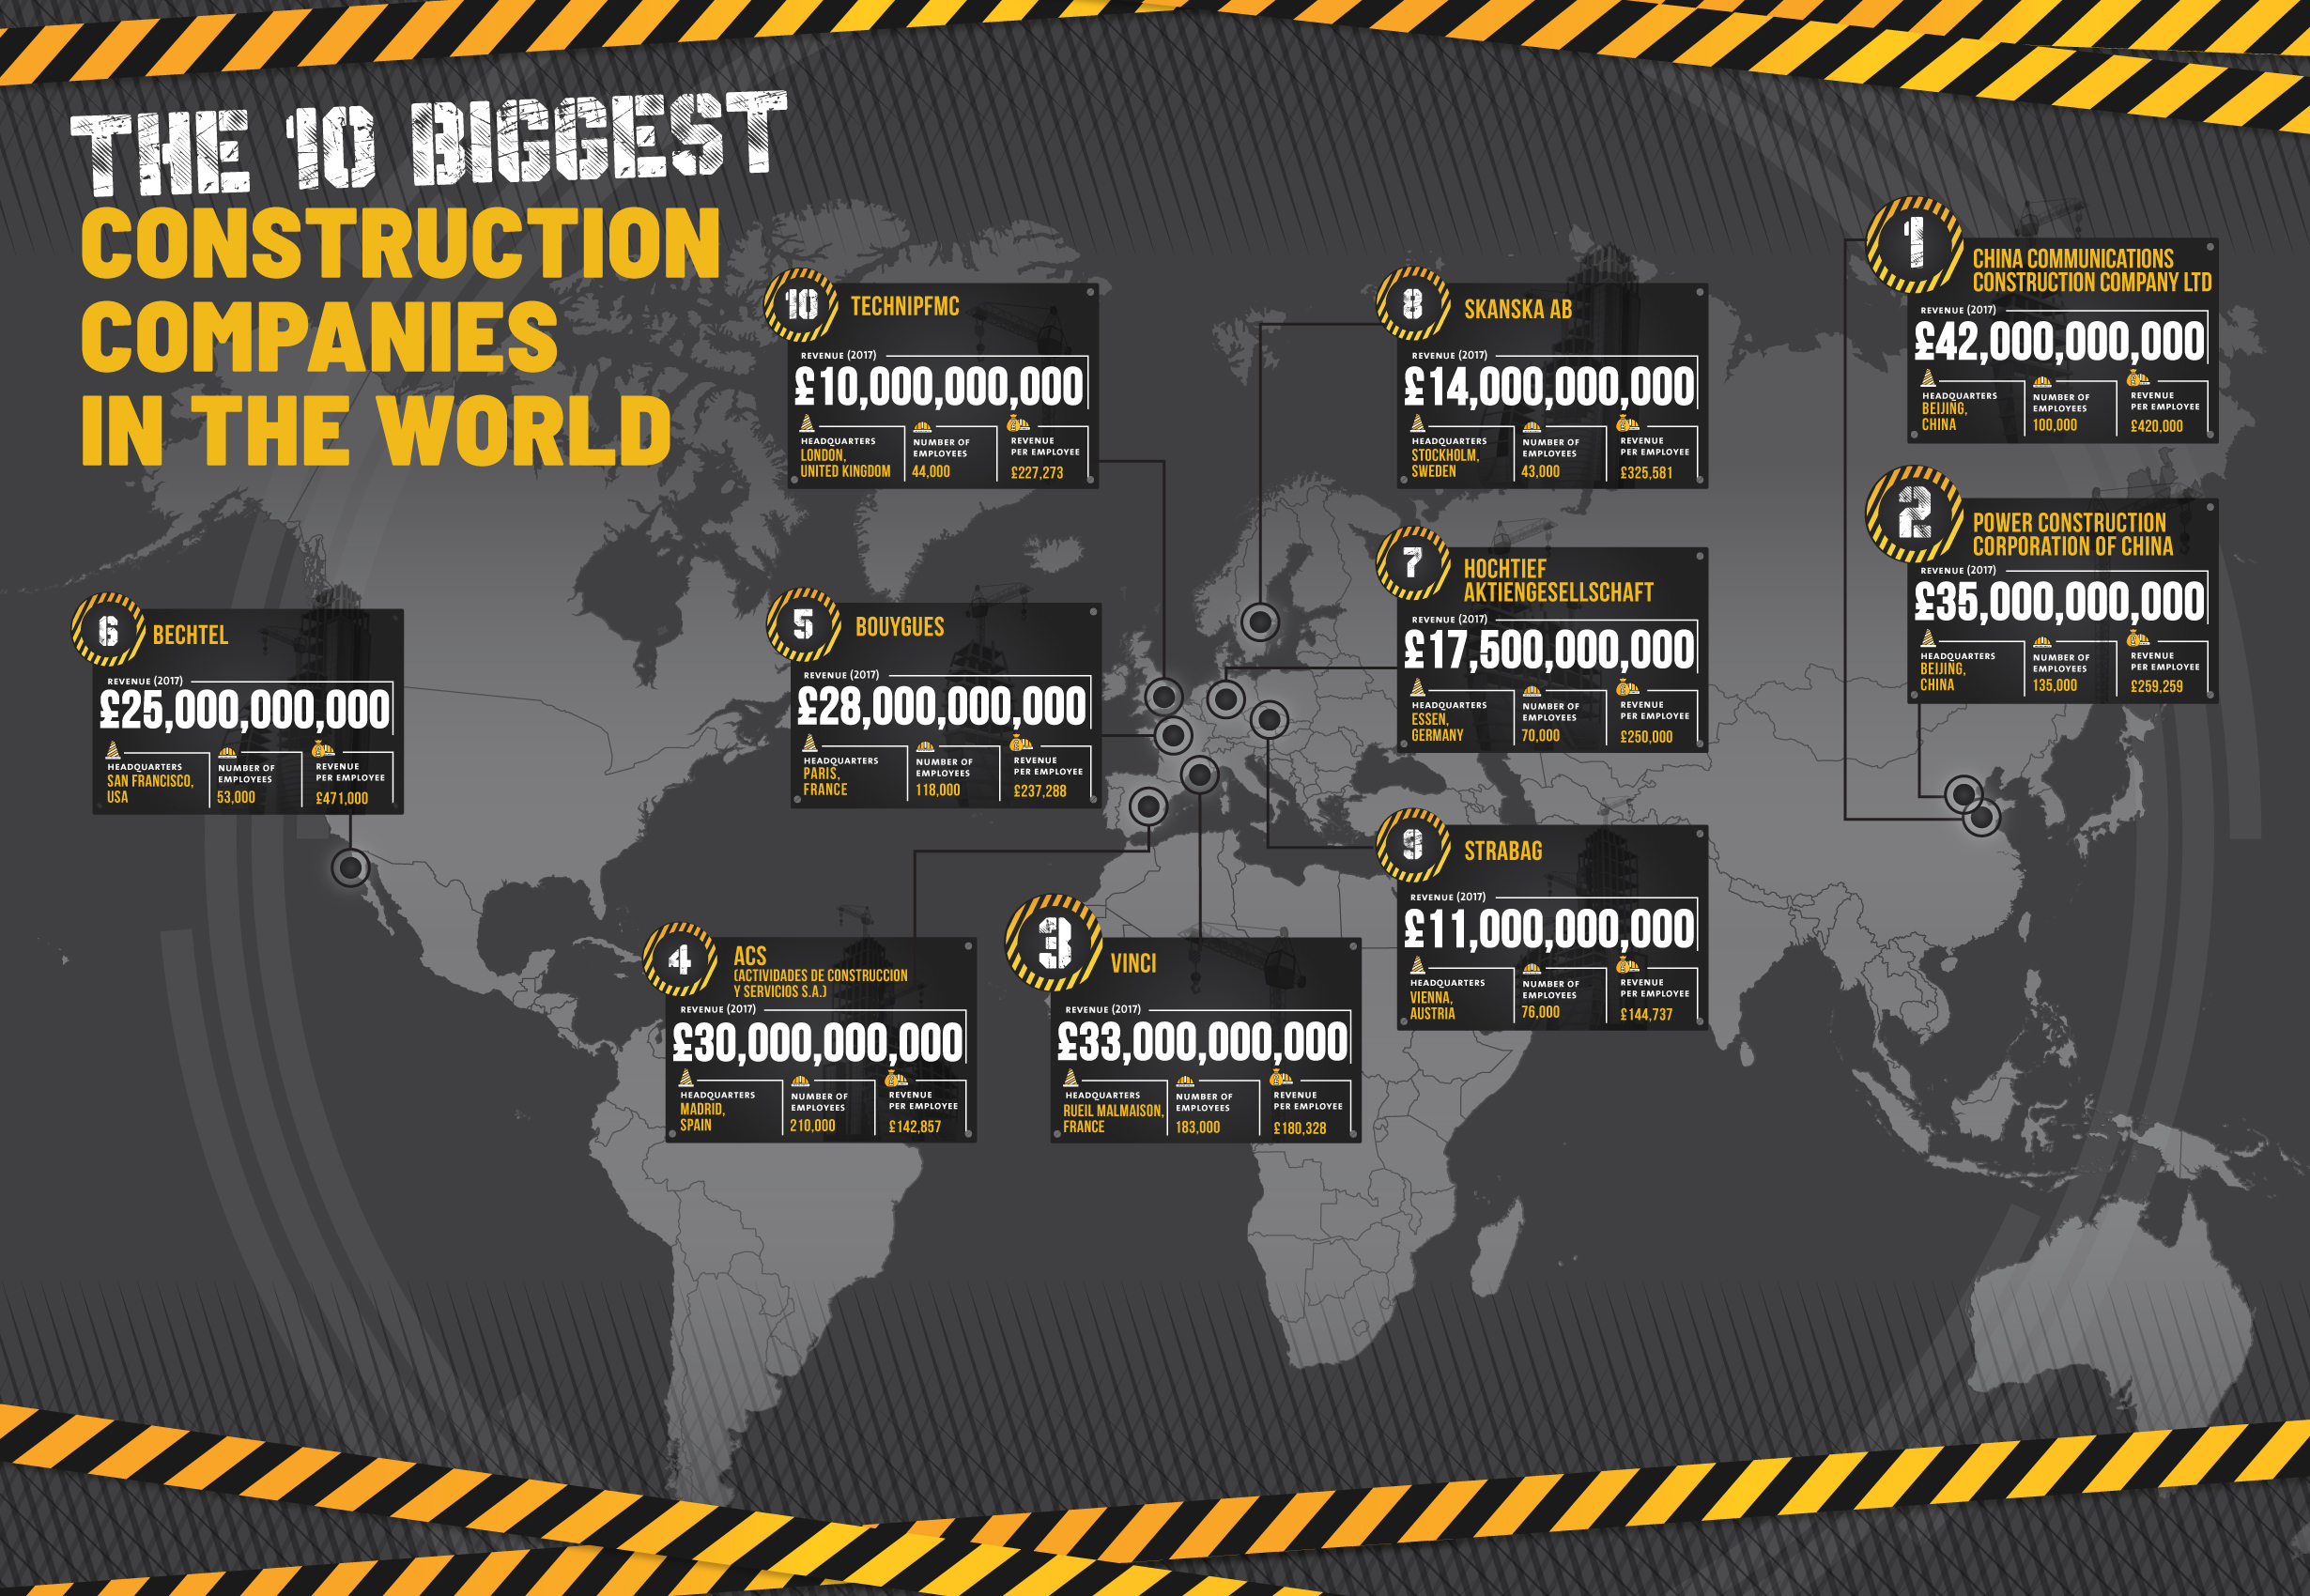 And finally... The 10 companies dominating the global construction industry